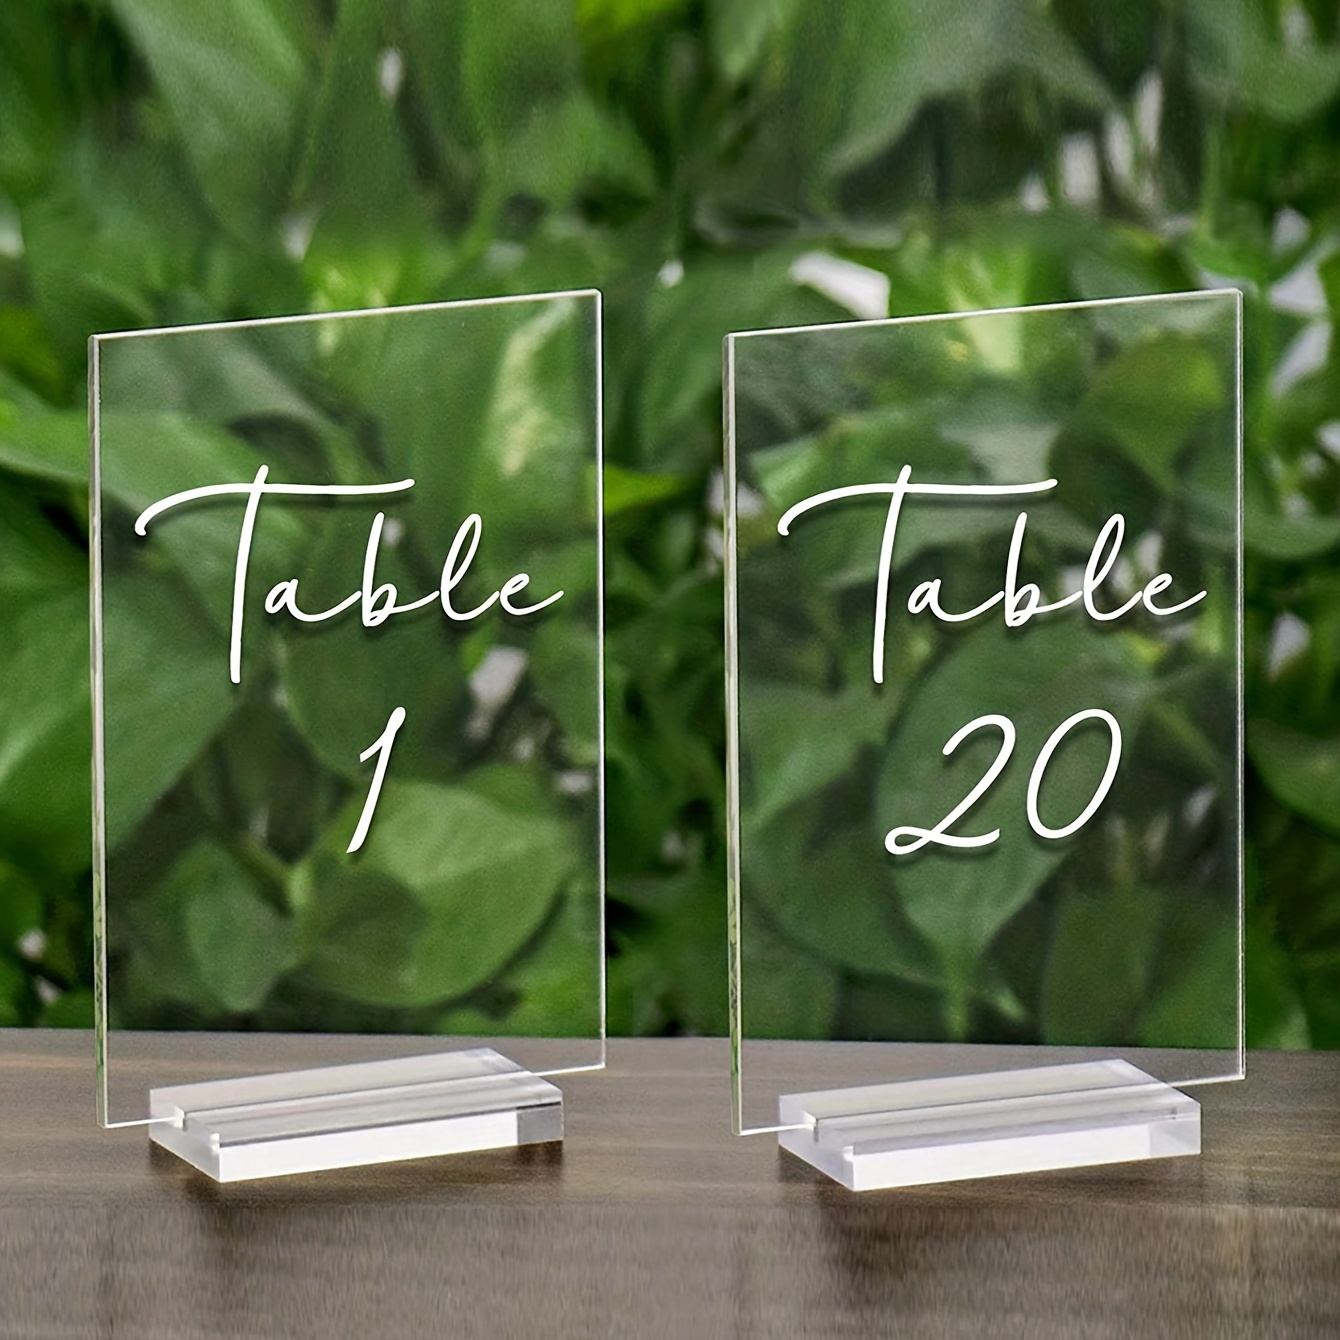 

10pcs, Acrylic Blank Sign Plate With Base, Transparent Acrylic Shelf, Wedding Table Number Plate, Acrylic Seat Table Guard Card, Wedding Diy Table Setting Dinner Plastic Card Sign, Home Decoration